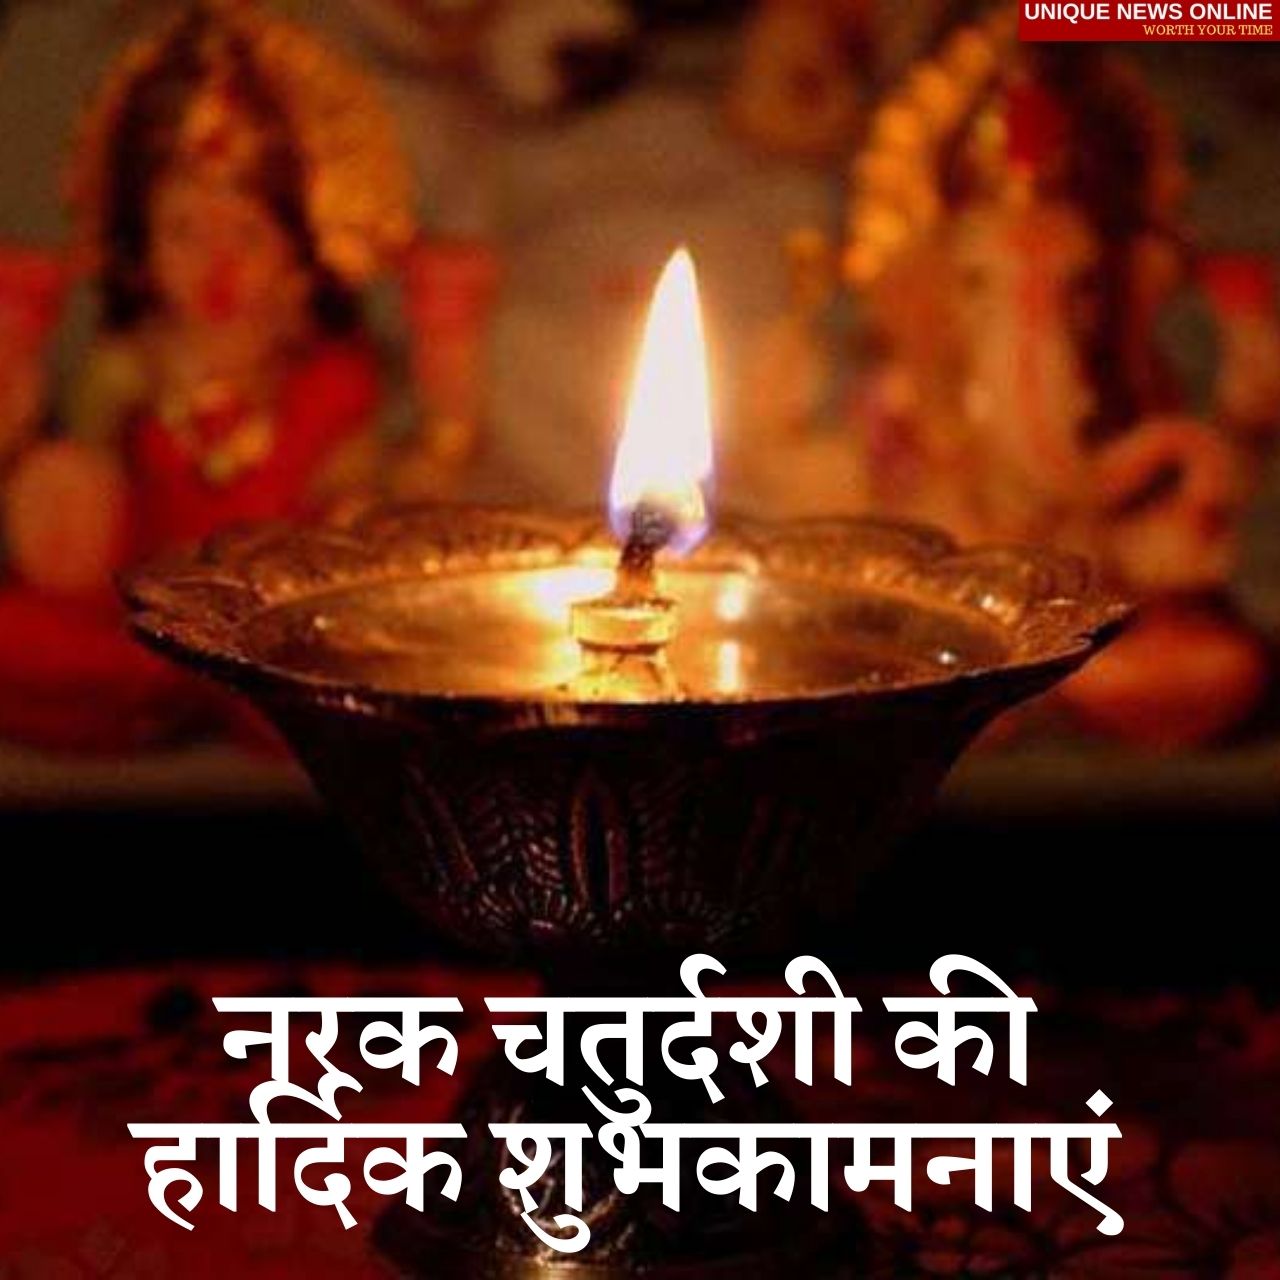 Narak Chaturdashi 2021 Hindi Wishes, HD Images, Quotes, Greetings, Messages, and Status to Greet your Friends and Relatives